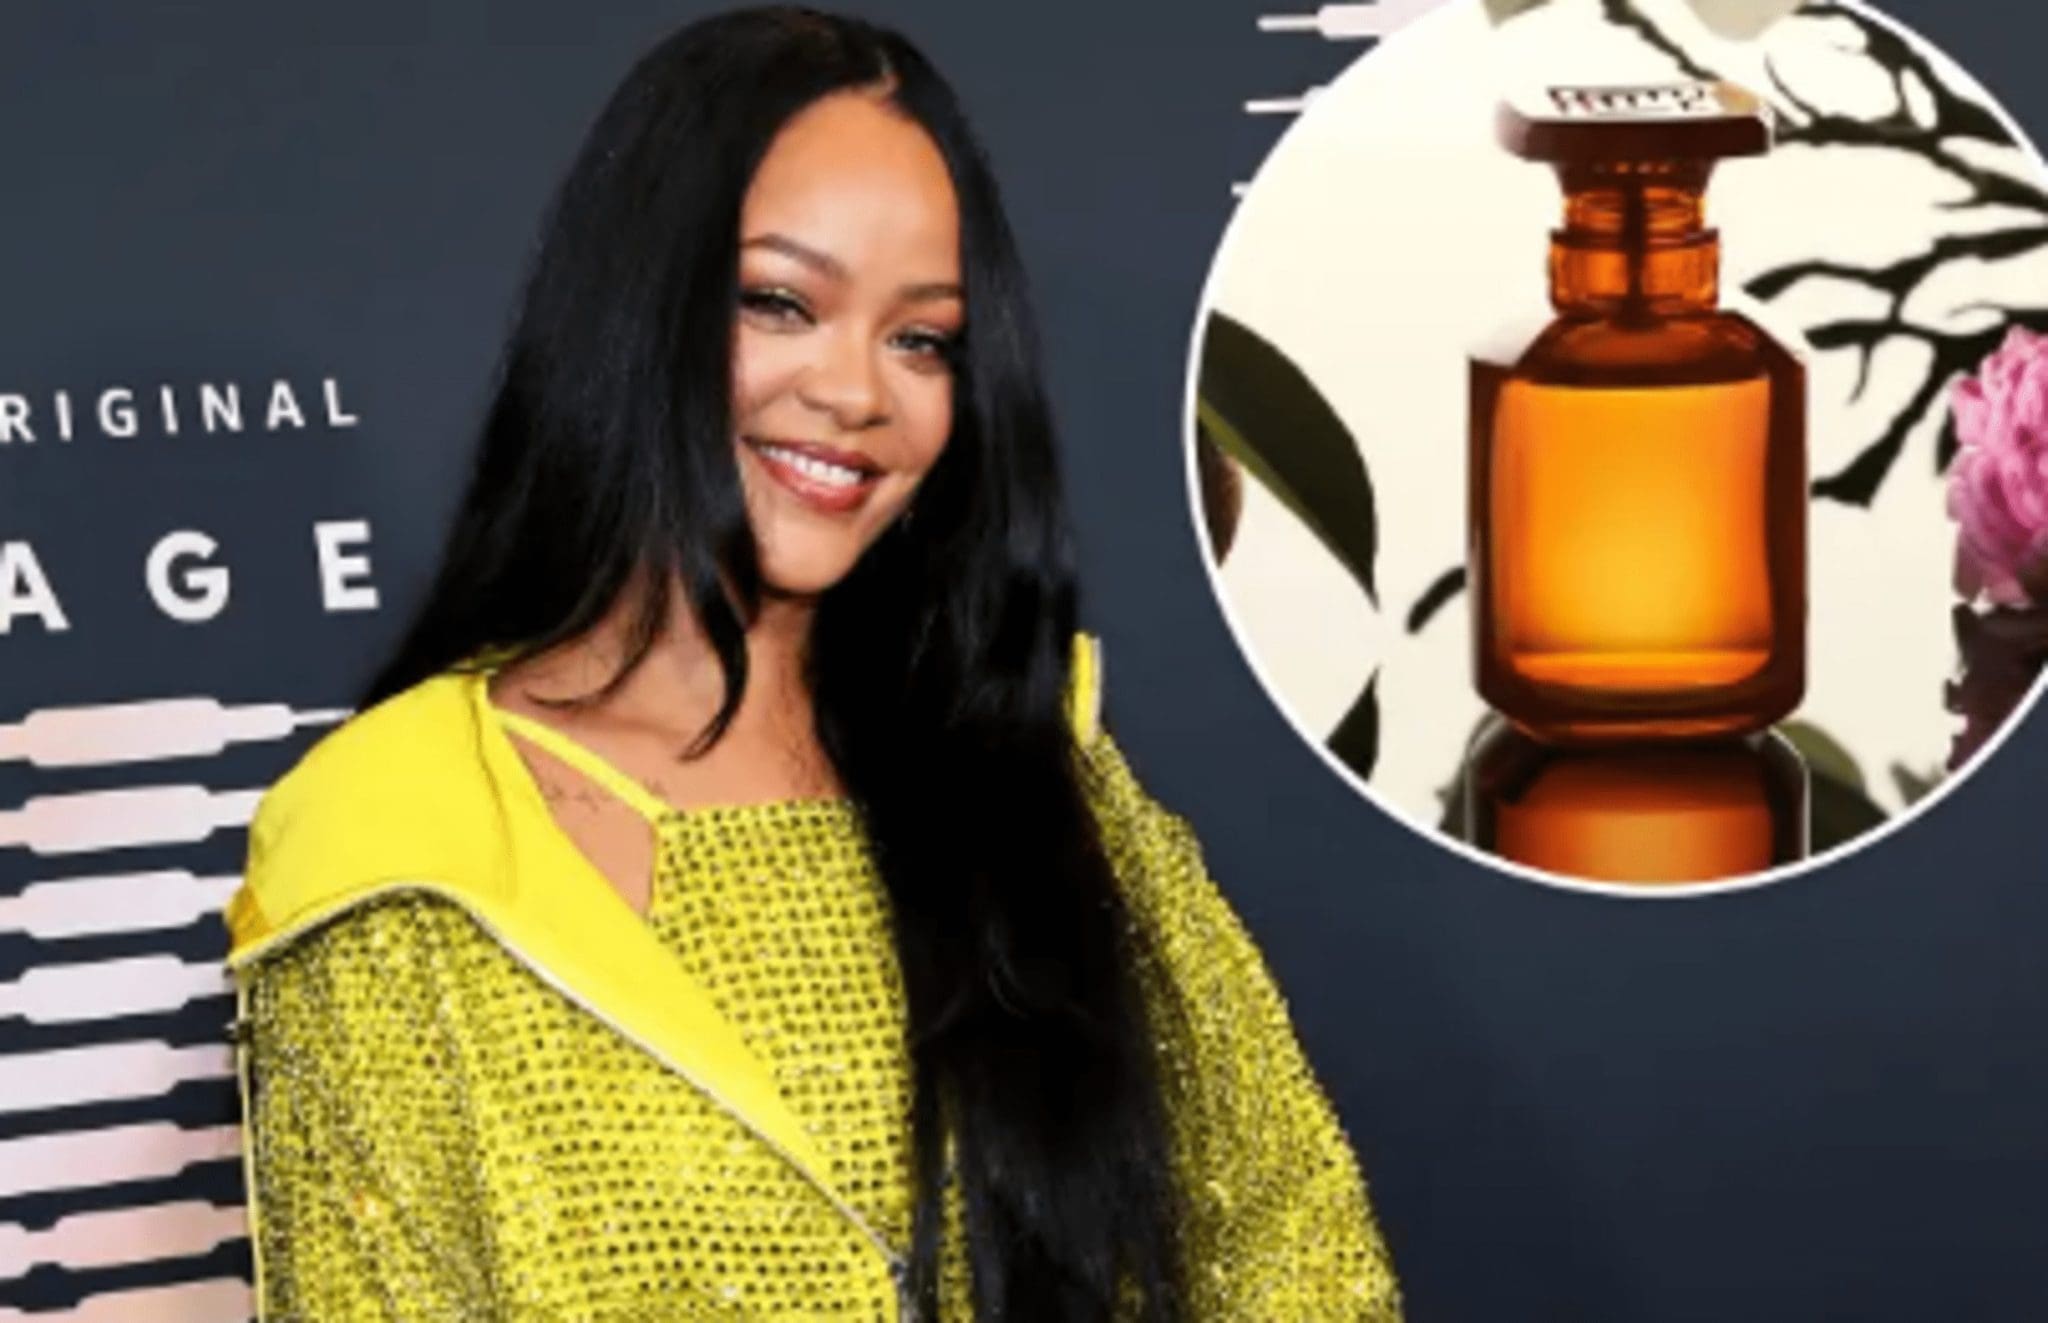 For the holidays, you may once again purchase Rihanna's Fenty Beauty fragrance.